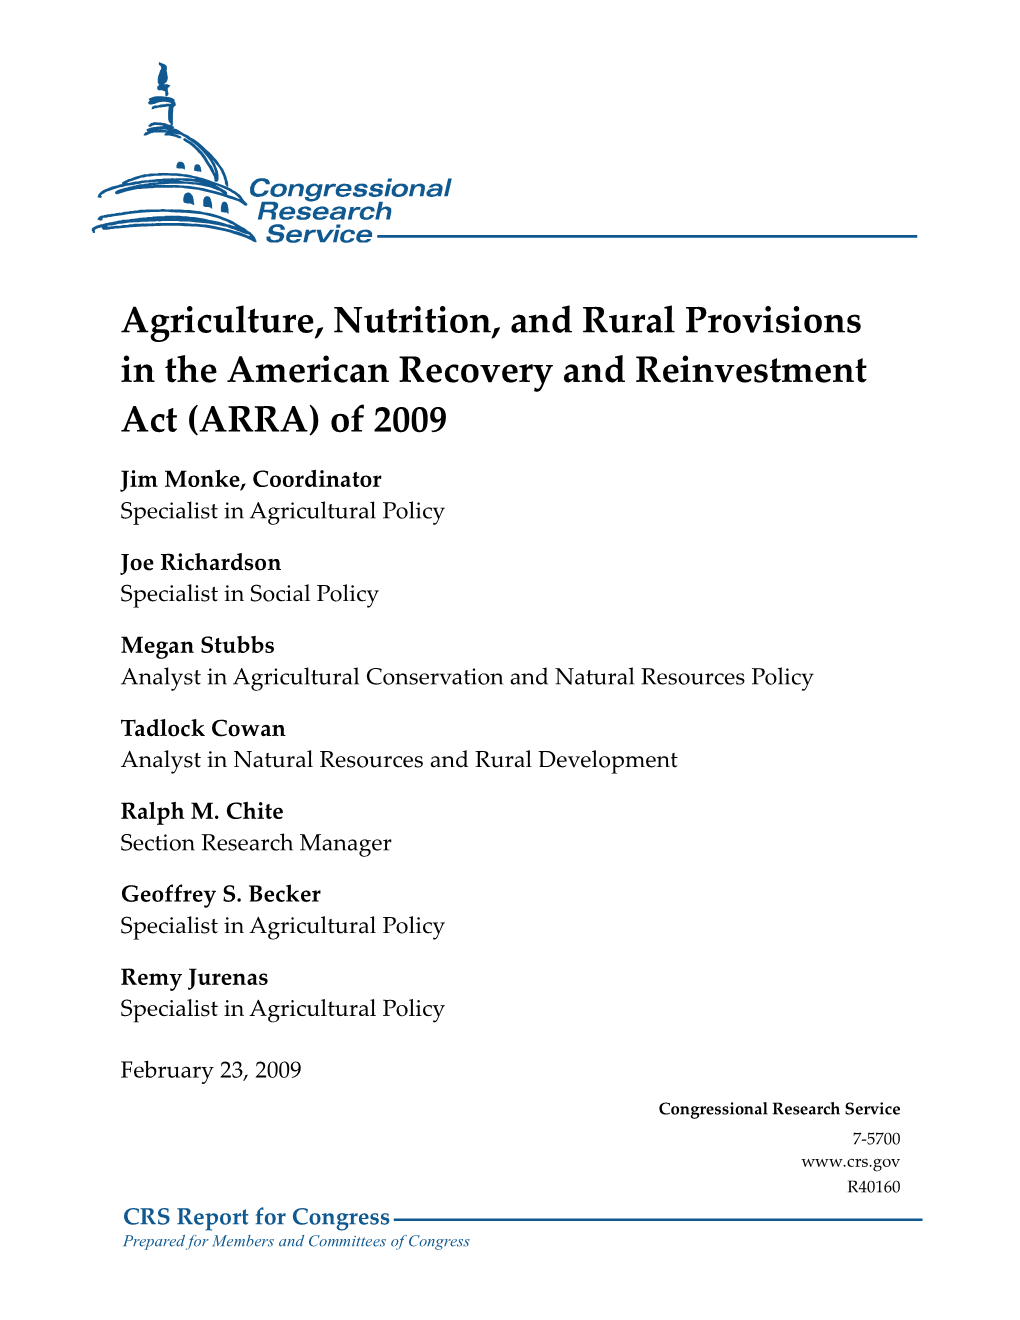 Agriculture, Nutrition, and Rural Provisions in the American Recovery and Reinvestment Act (ARRA) of 2009